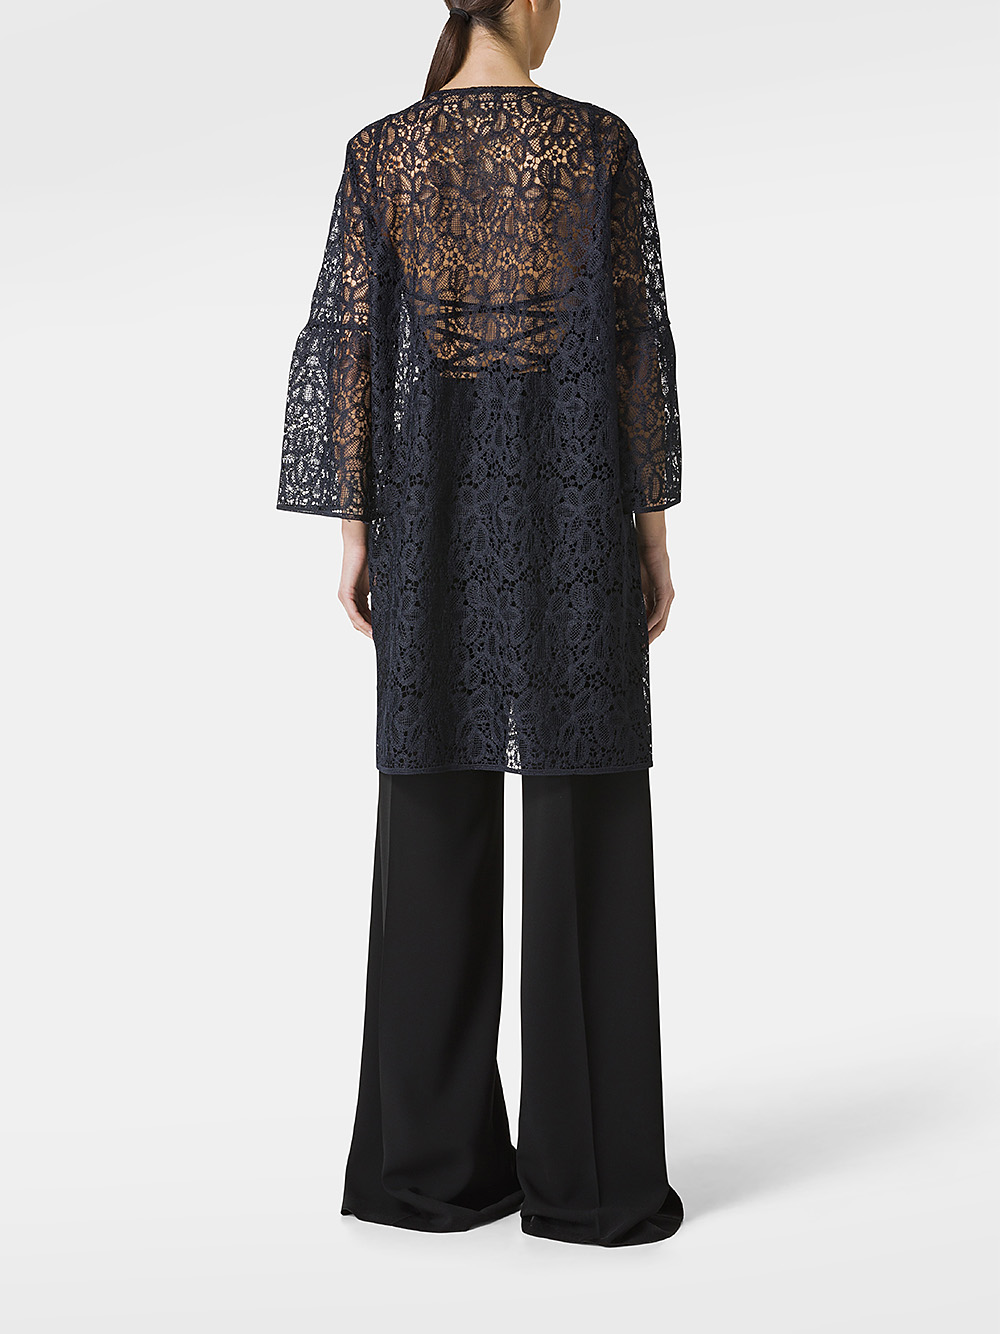 Anfora coat in macramé lace with pattern